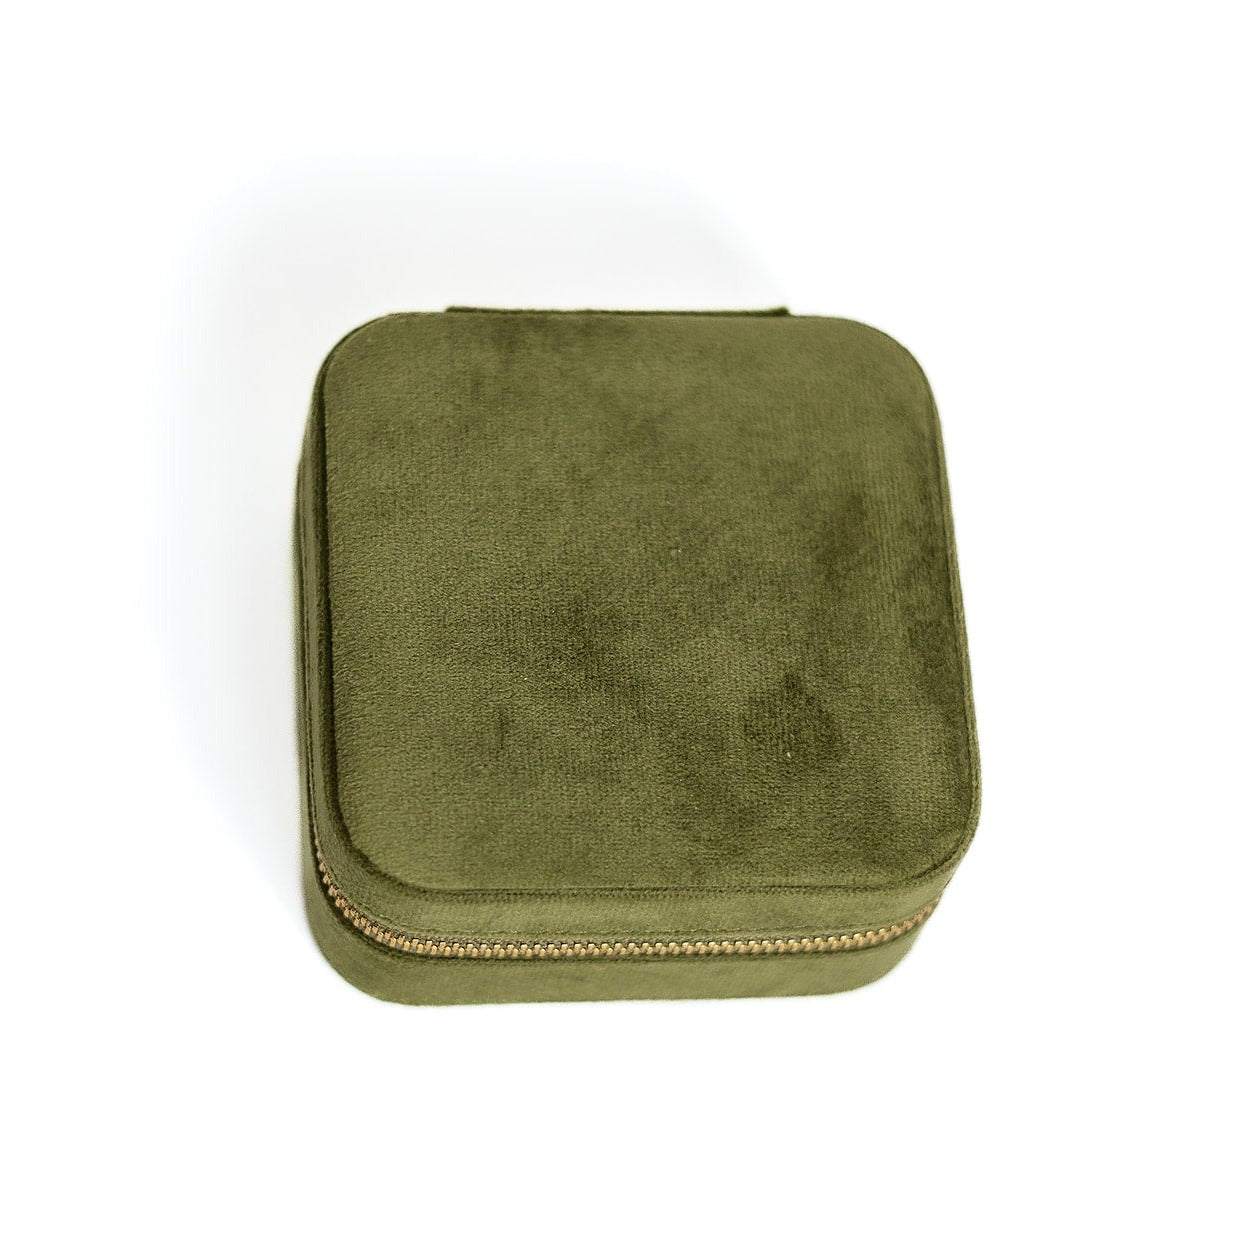 The outside of an olive-coloured jewelry case.